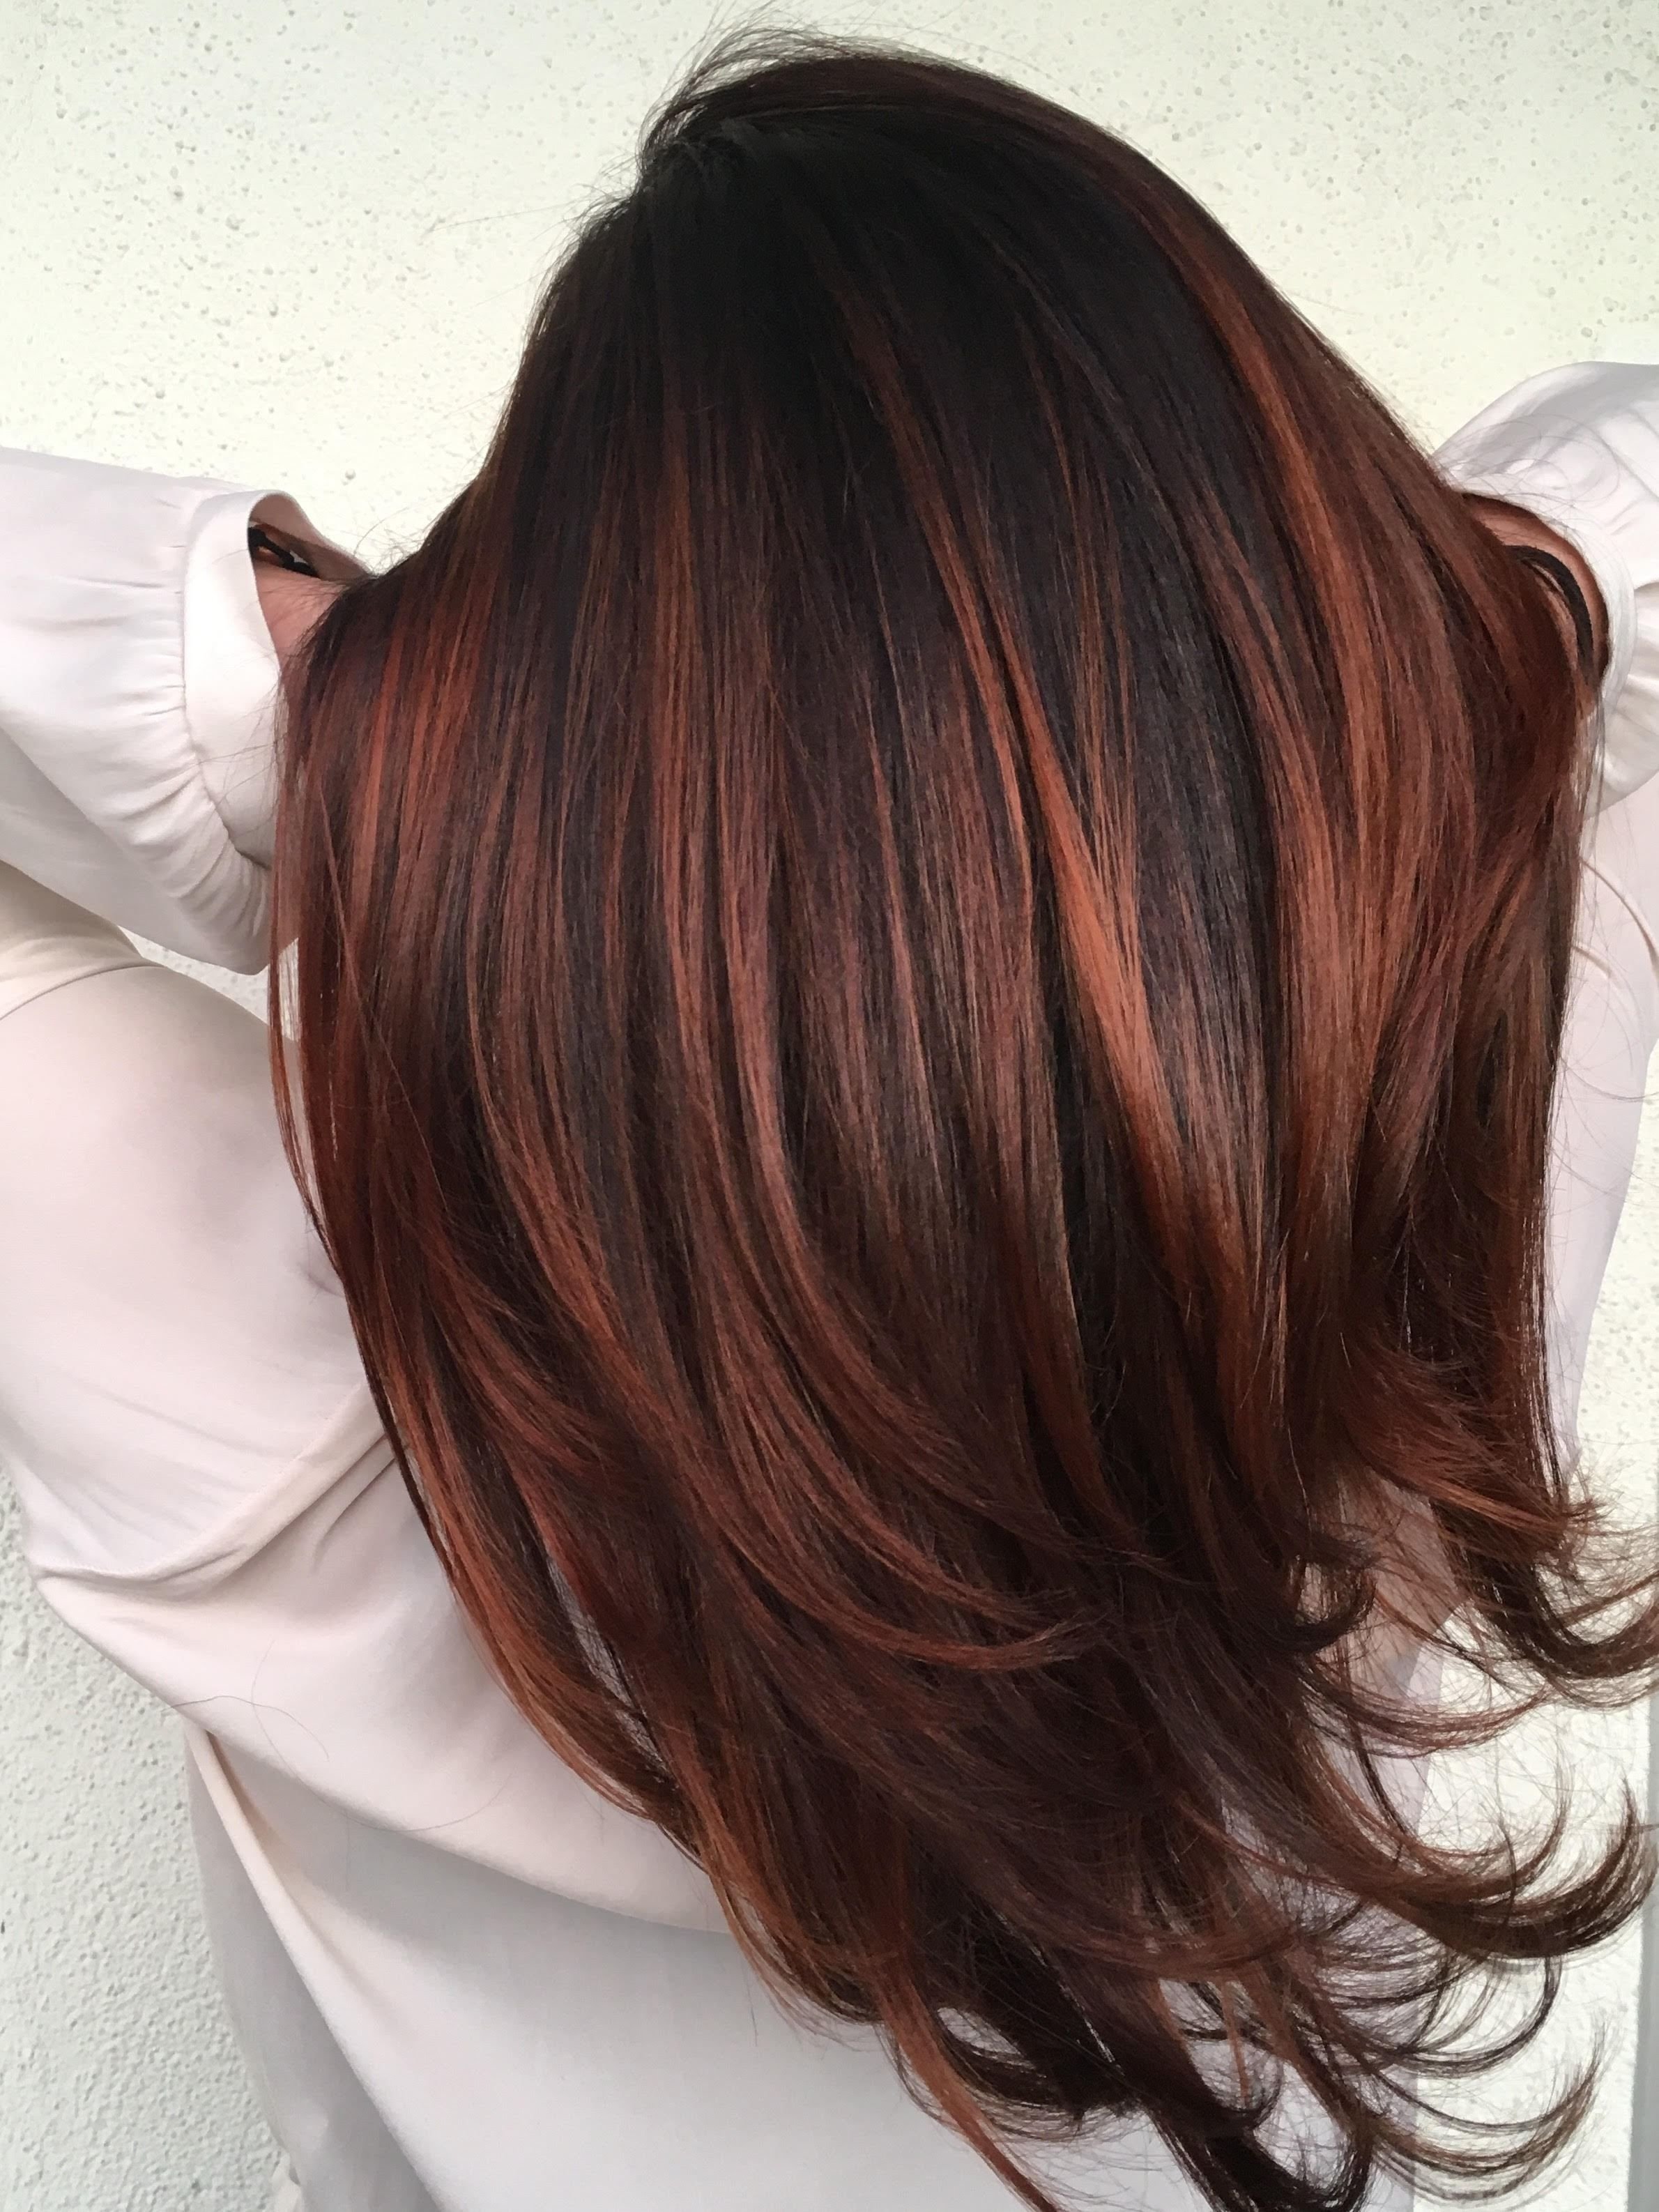 10 Awesome Summer Hair Color Ideas For Brunettes 45 hair color ideas for brunettes for fall winter summer auburn 2 2022